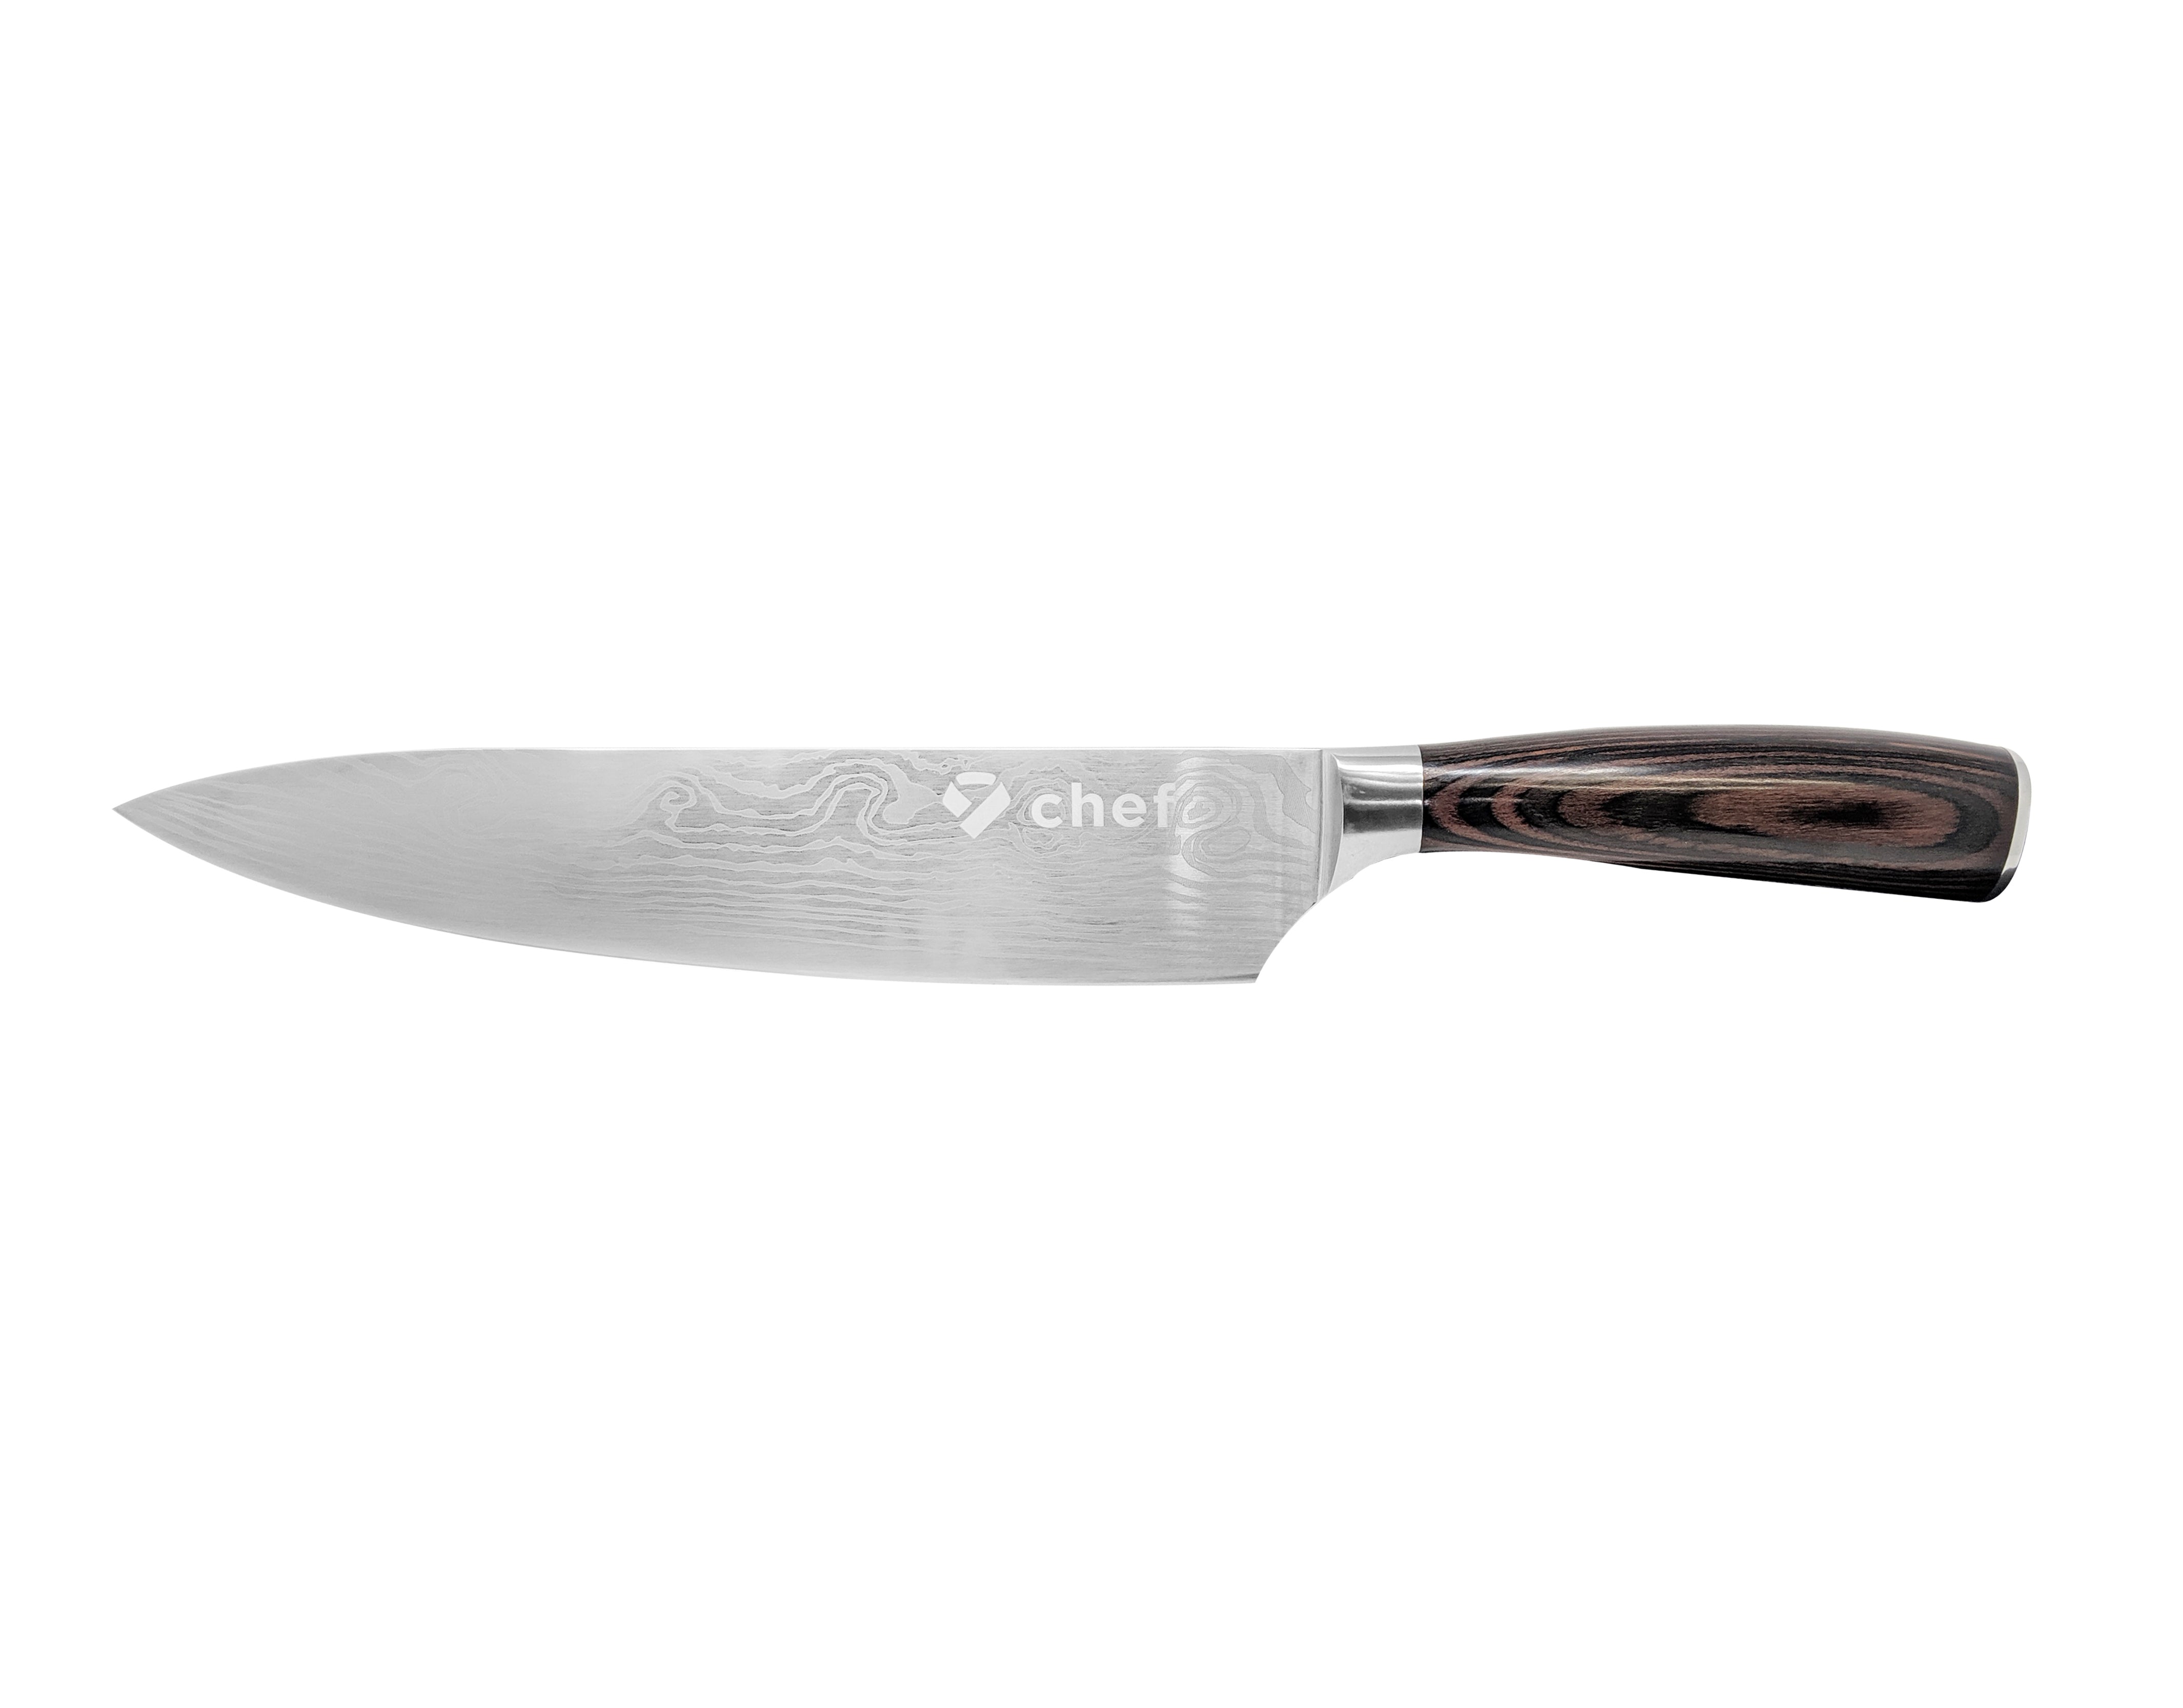 Kitchen Knife Chef Knife 8 Inch German High Carbon Stainless Steel  Ultra-Sharp